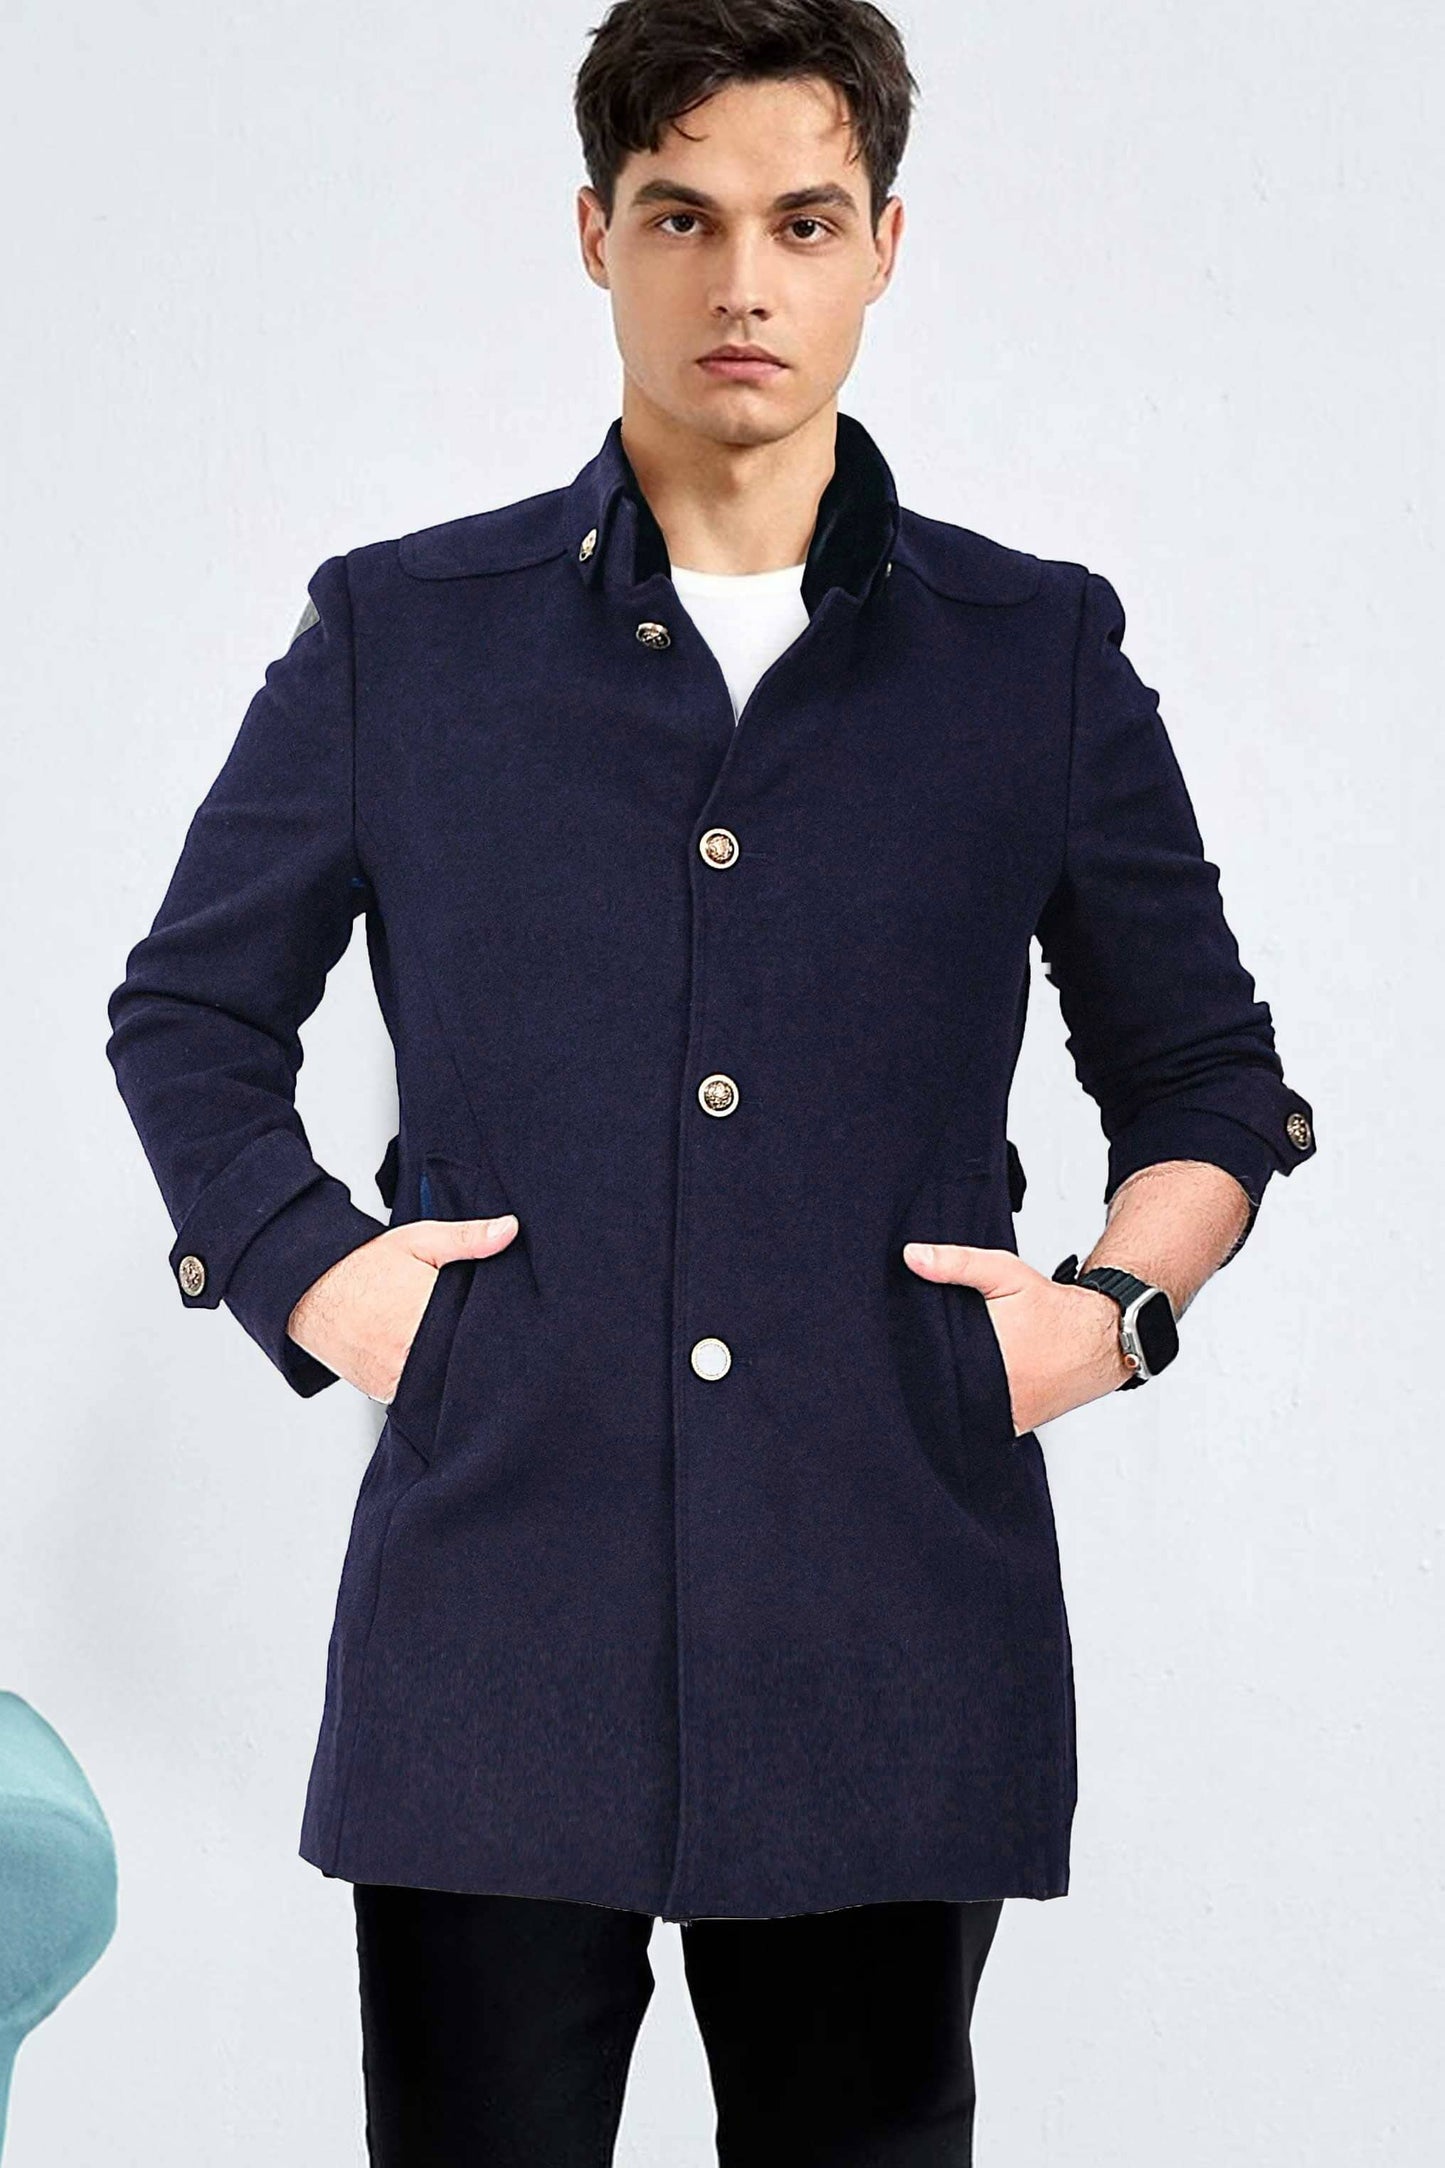 Fashion Men's Winter Outwear British Style Imported Coat Men's Jacket First Choice 